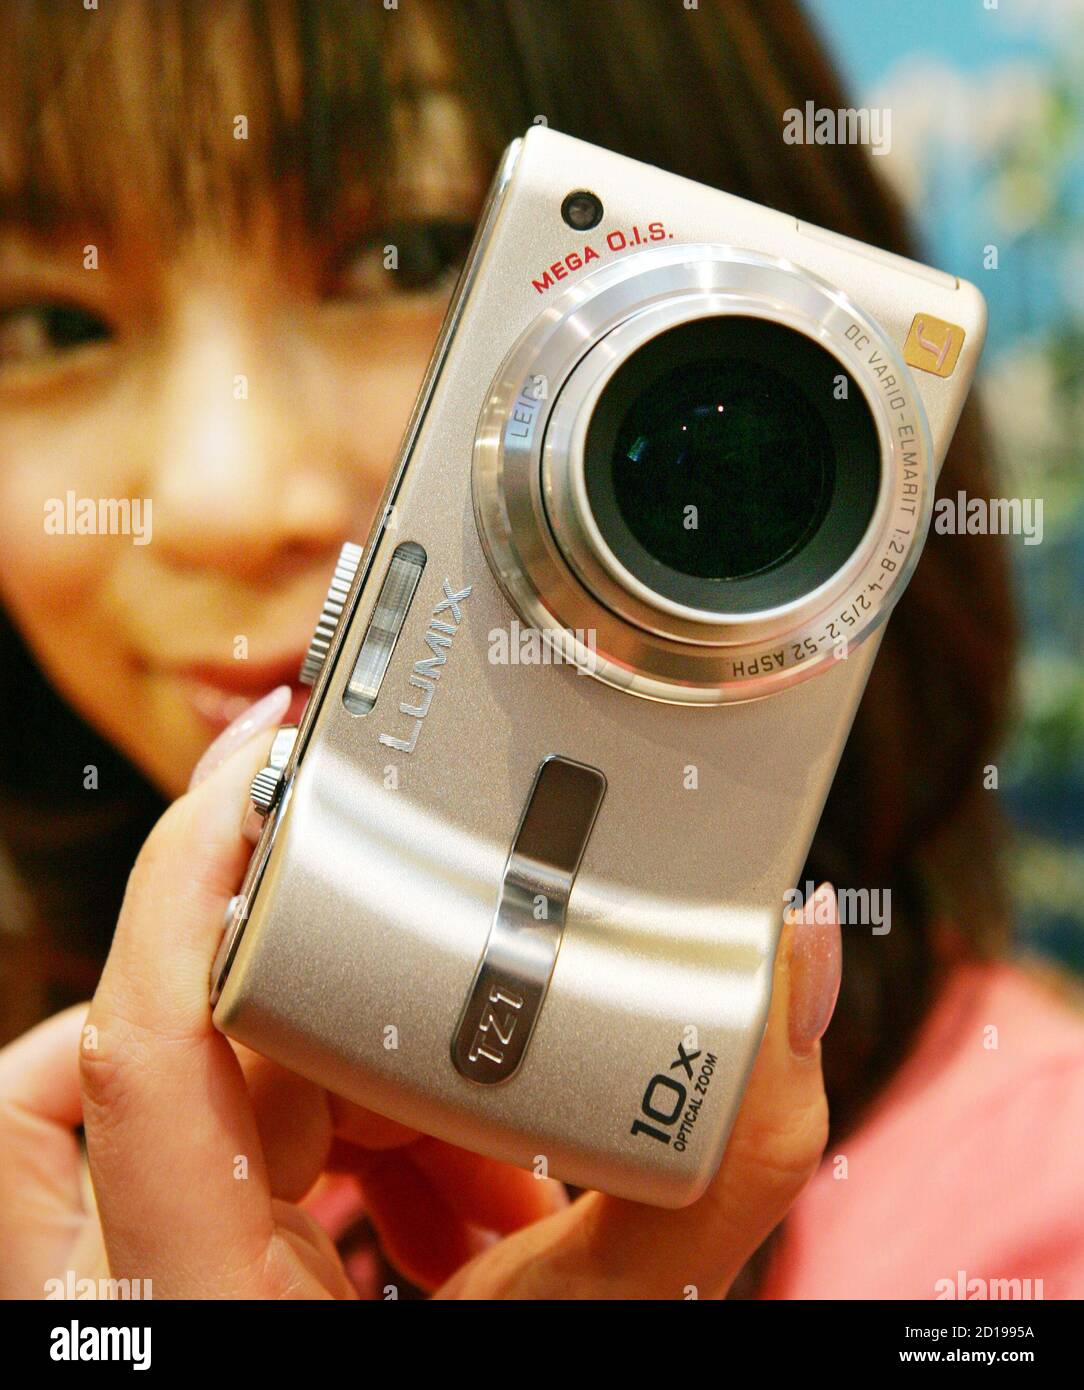 Bekentenis Distilleren eetlust Japanese model Rina Matsuda presents Panasonic's new "LUMIX" digital still  camera DMC-TZ1 at an unveiling in Tokyo February 14, 2006. The five- megapixel camera, manufactured by Matsushita Electric Industrial Co., is  equipped with